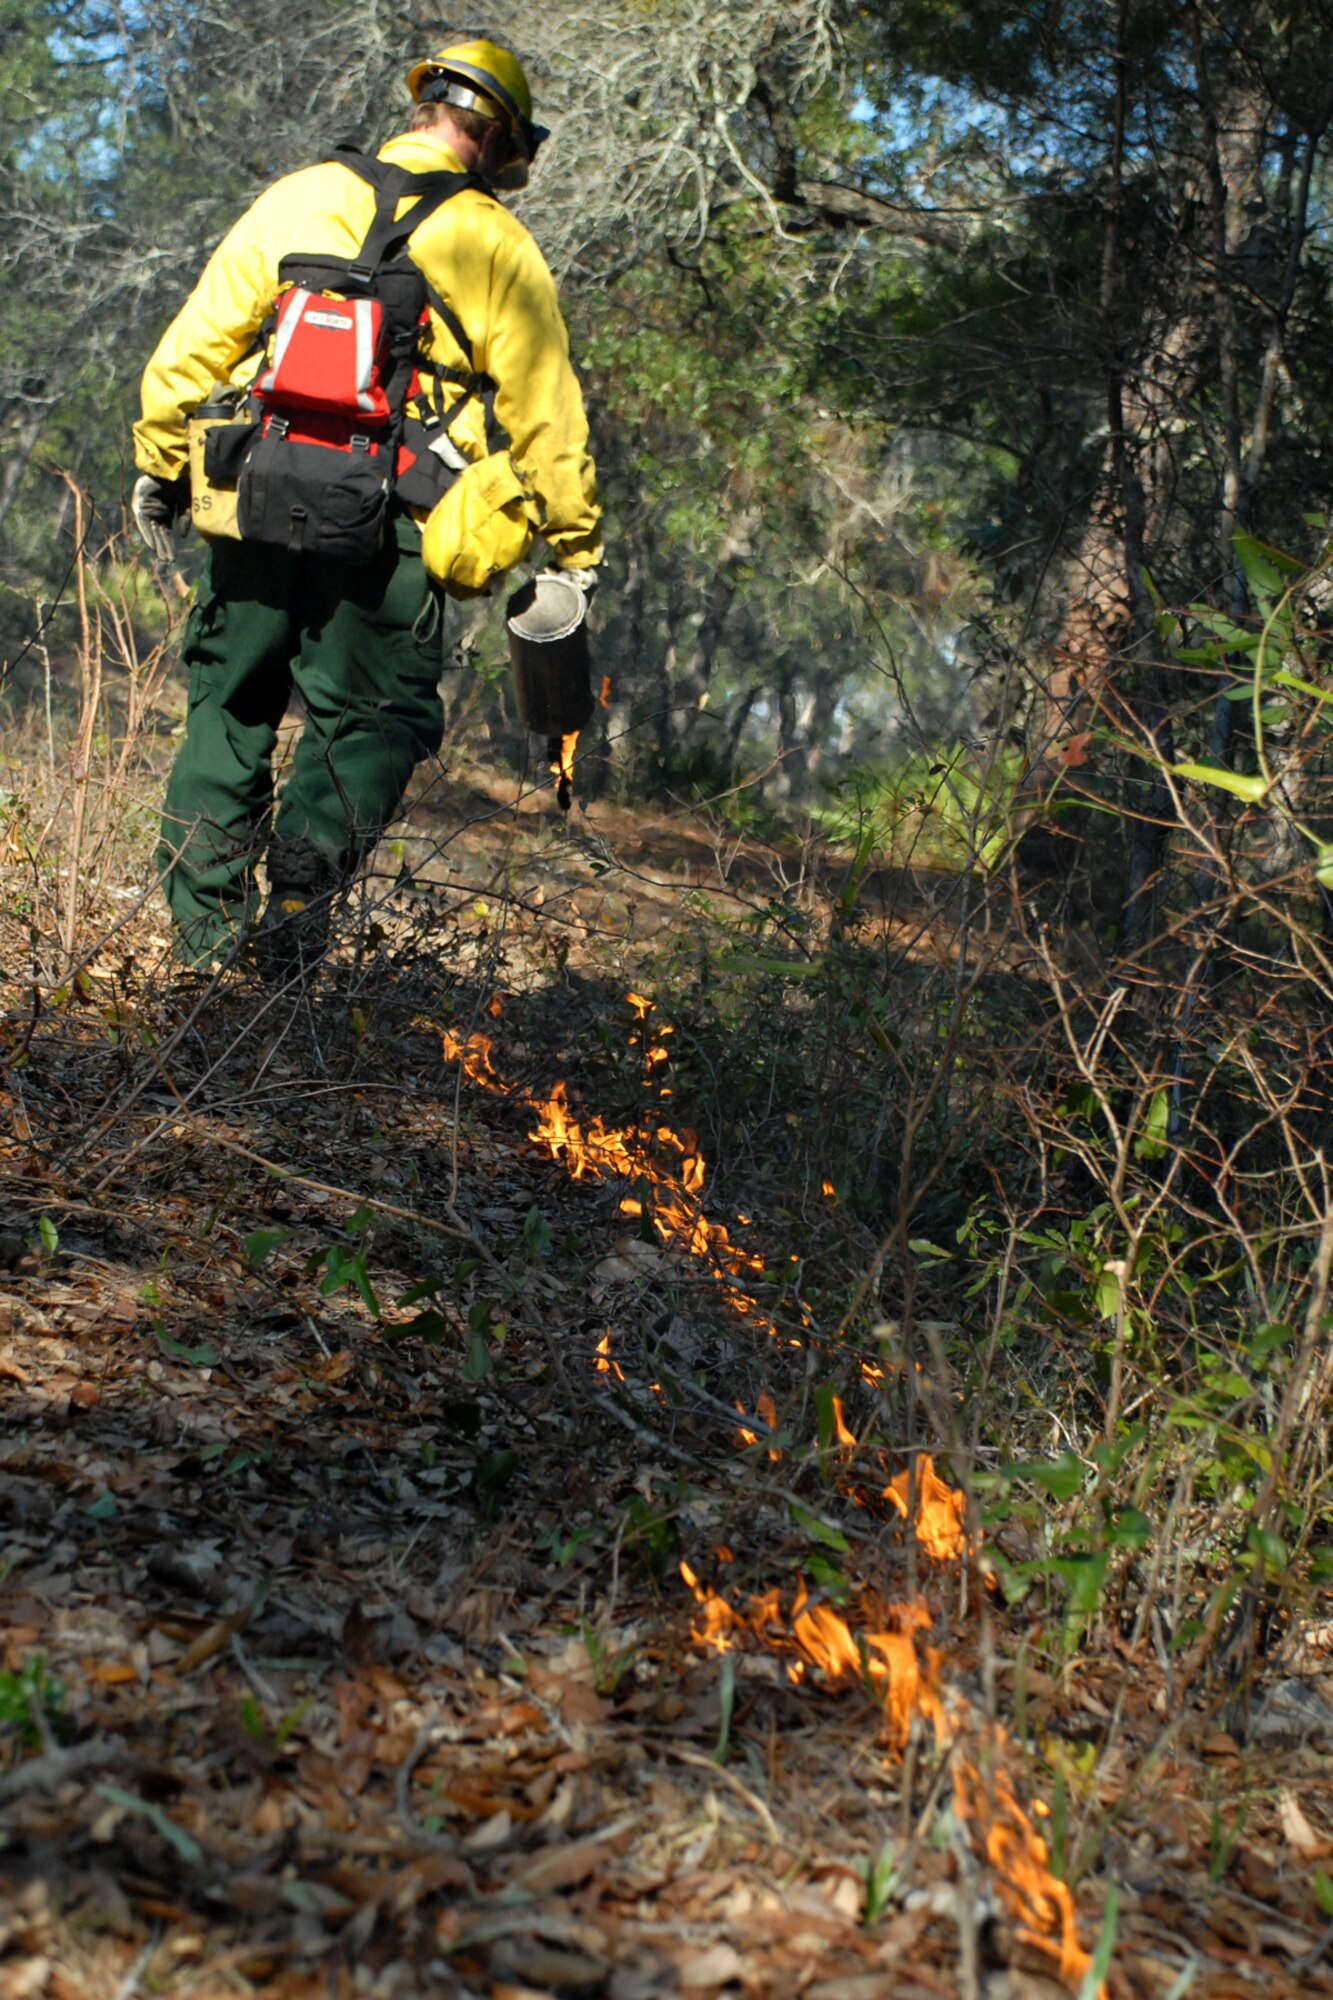 EGLIN AIR FORCE BASE, Fla. ? Hollister Hurt, a Jackson Guard forestry technician and wildland fire specialist, uses a fire drip can to start a fire line during a prescribed burn at White Point, an 85-acre recreation area on the Choctawhatchee Bay Jan. 29. Many native plants and animal species depend on Eglin?s fire-dependent long-leaf pine ecosystem, 11 of which are federally protected. Endangered species such as the red-cockaded woodpecker, depend on fire that is typically caused by either lightning strikes or Eglin's resident fire managers to survive. As of the 2008 control burn season, Jackson Guard?s five-year average is 73,000 acres burned annually. (U.S. Air Force Photo by Staff Sgt. Mike Meares)